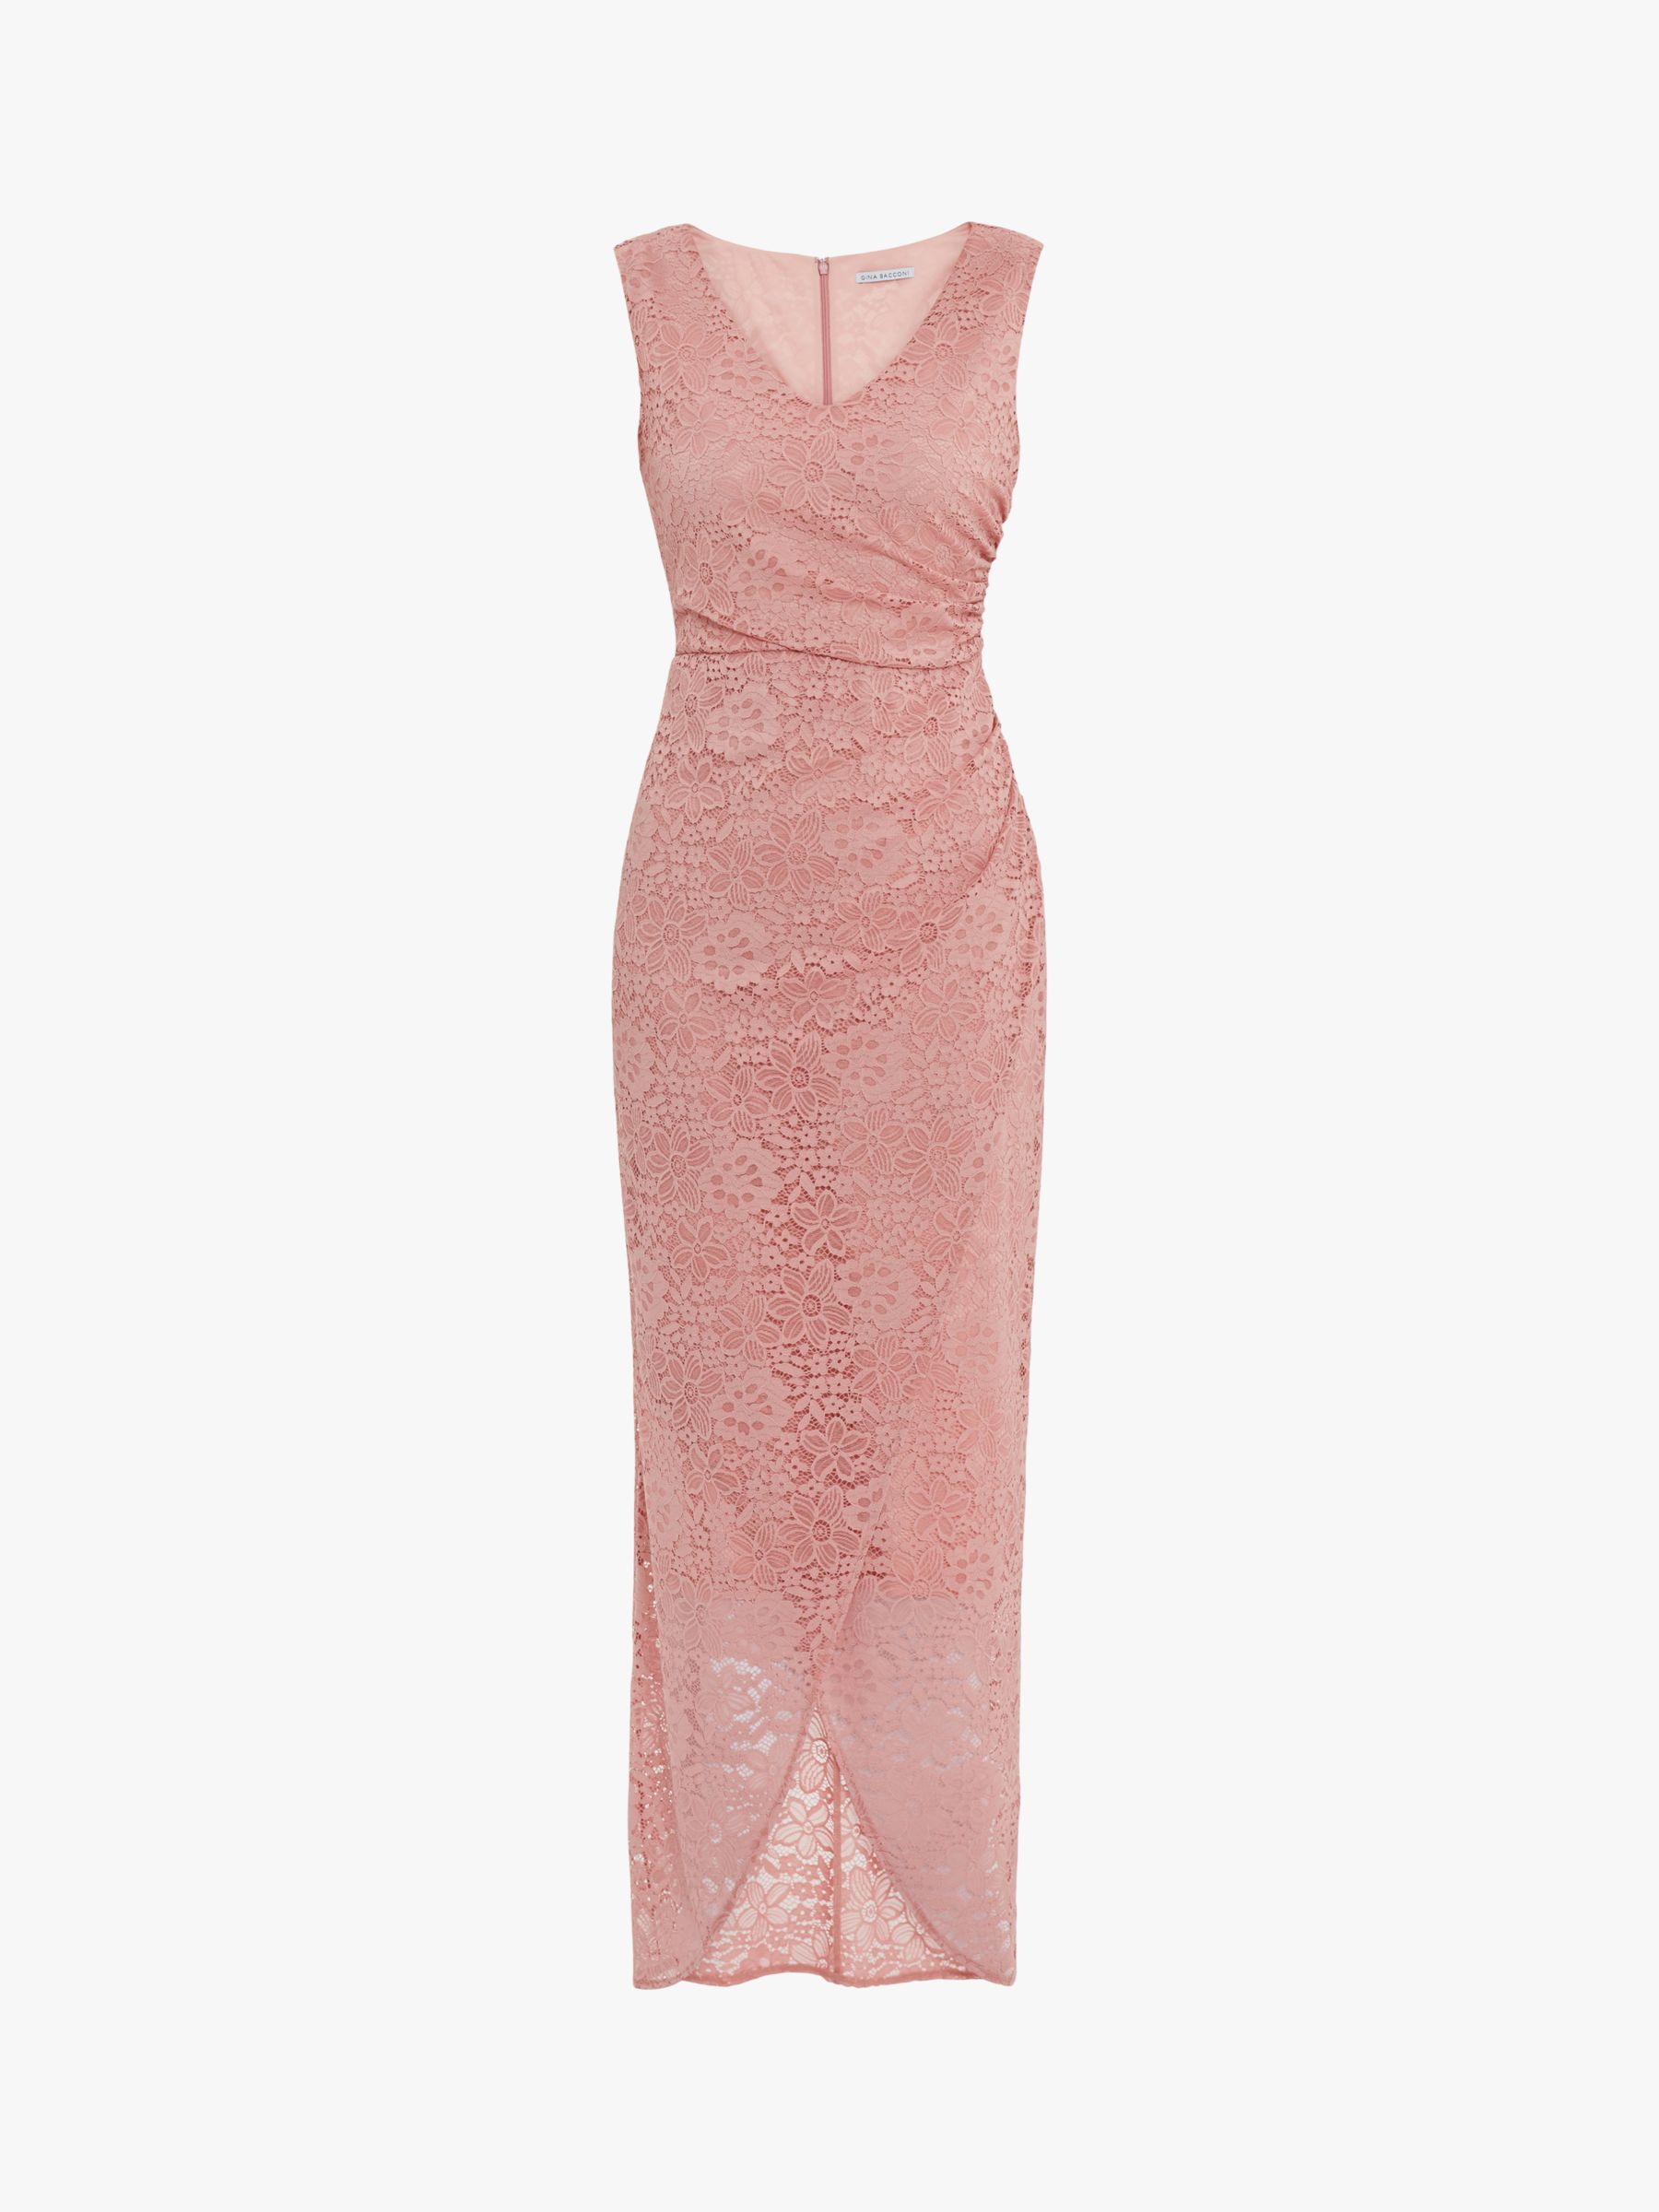 Buy Gina Bacconi Leven Stretch Lace Dress Online at johnlewis.com